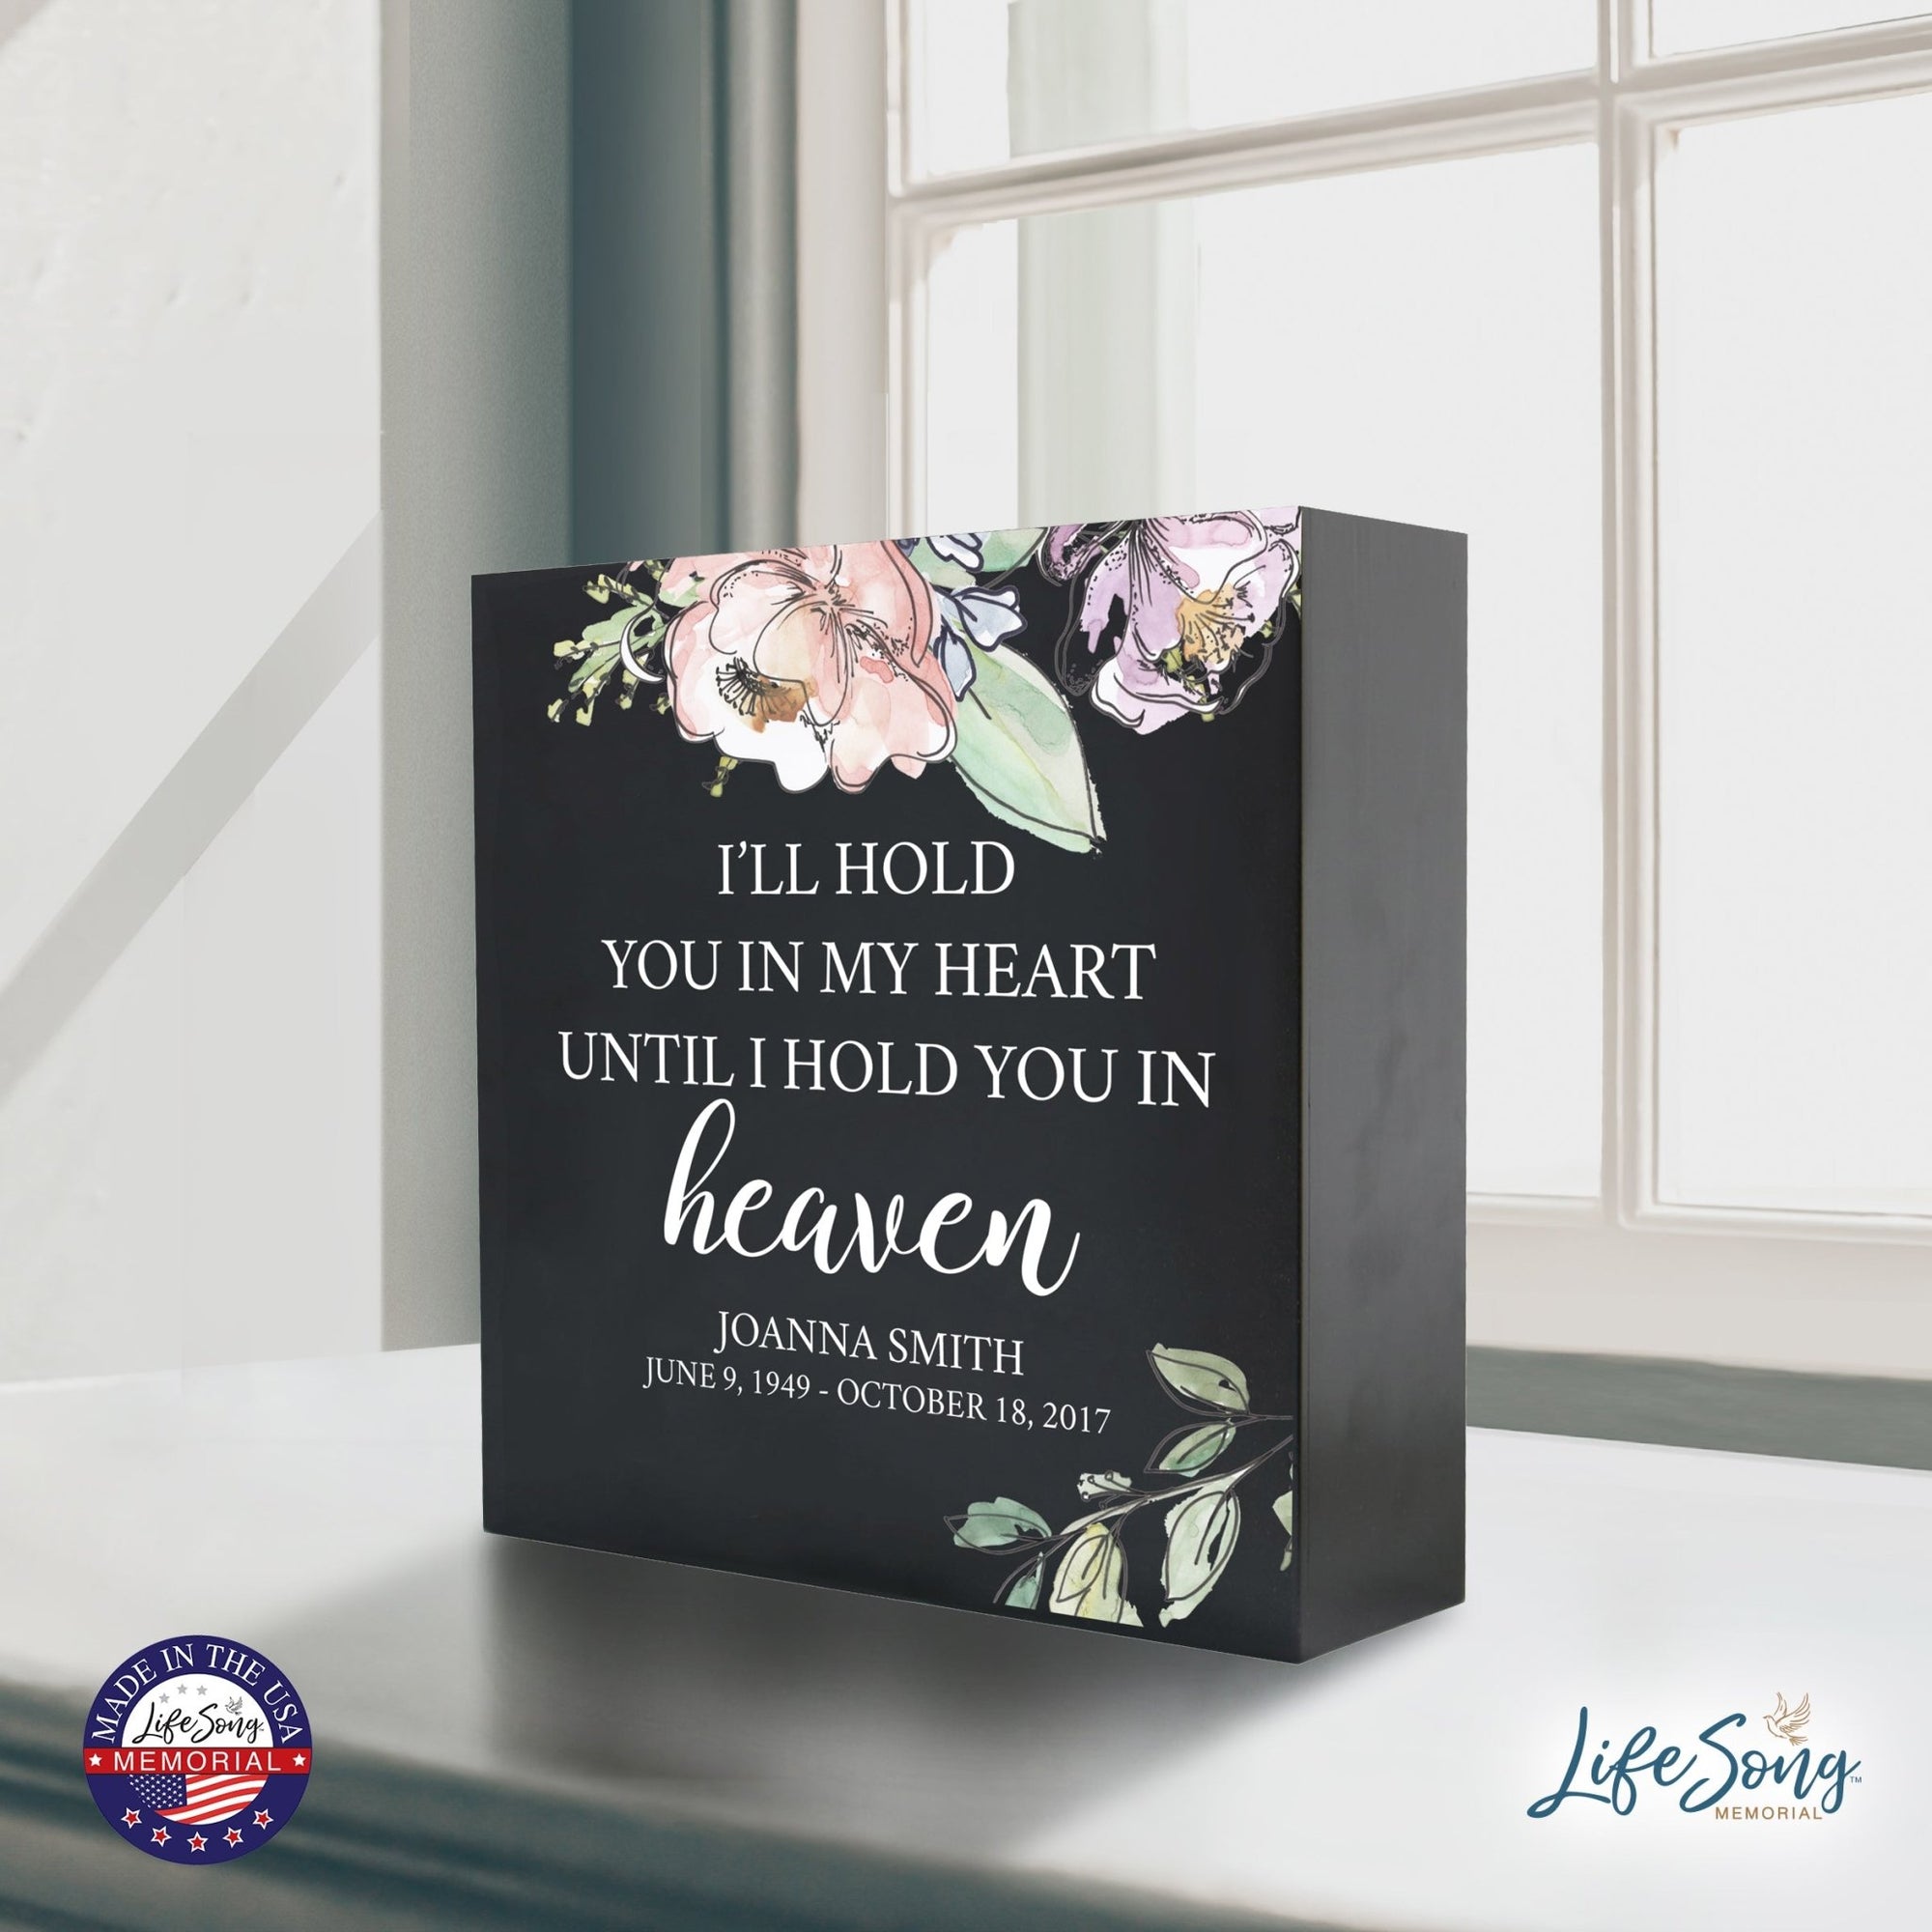 Personalized Modern Inspirational Memorial Wooden Shadow Box and Urn 10x10 holds 189 cu in of Human Ashes - I’ll Hold You (Heart) - LifeSong Milestones